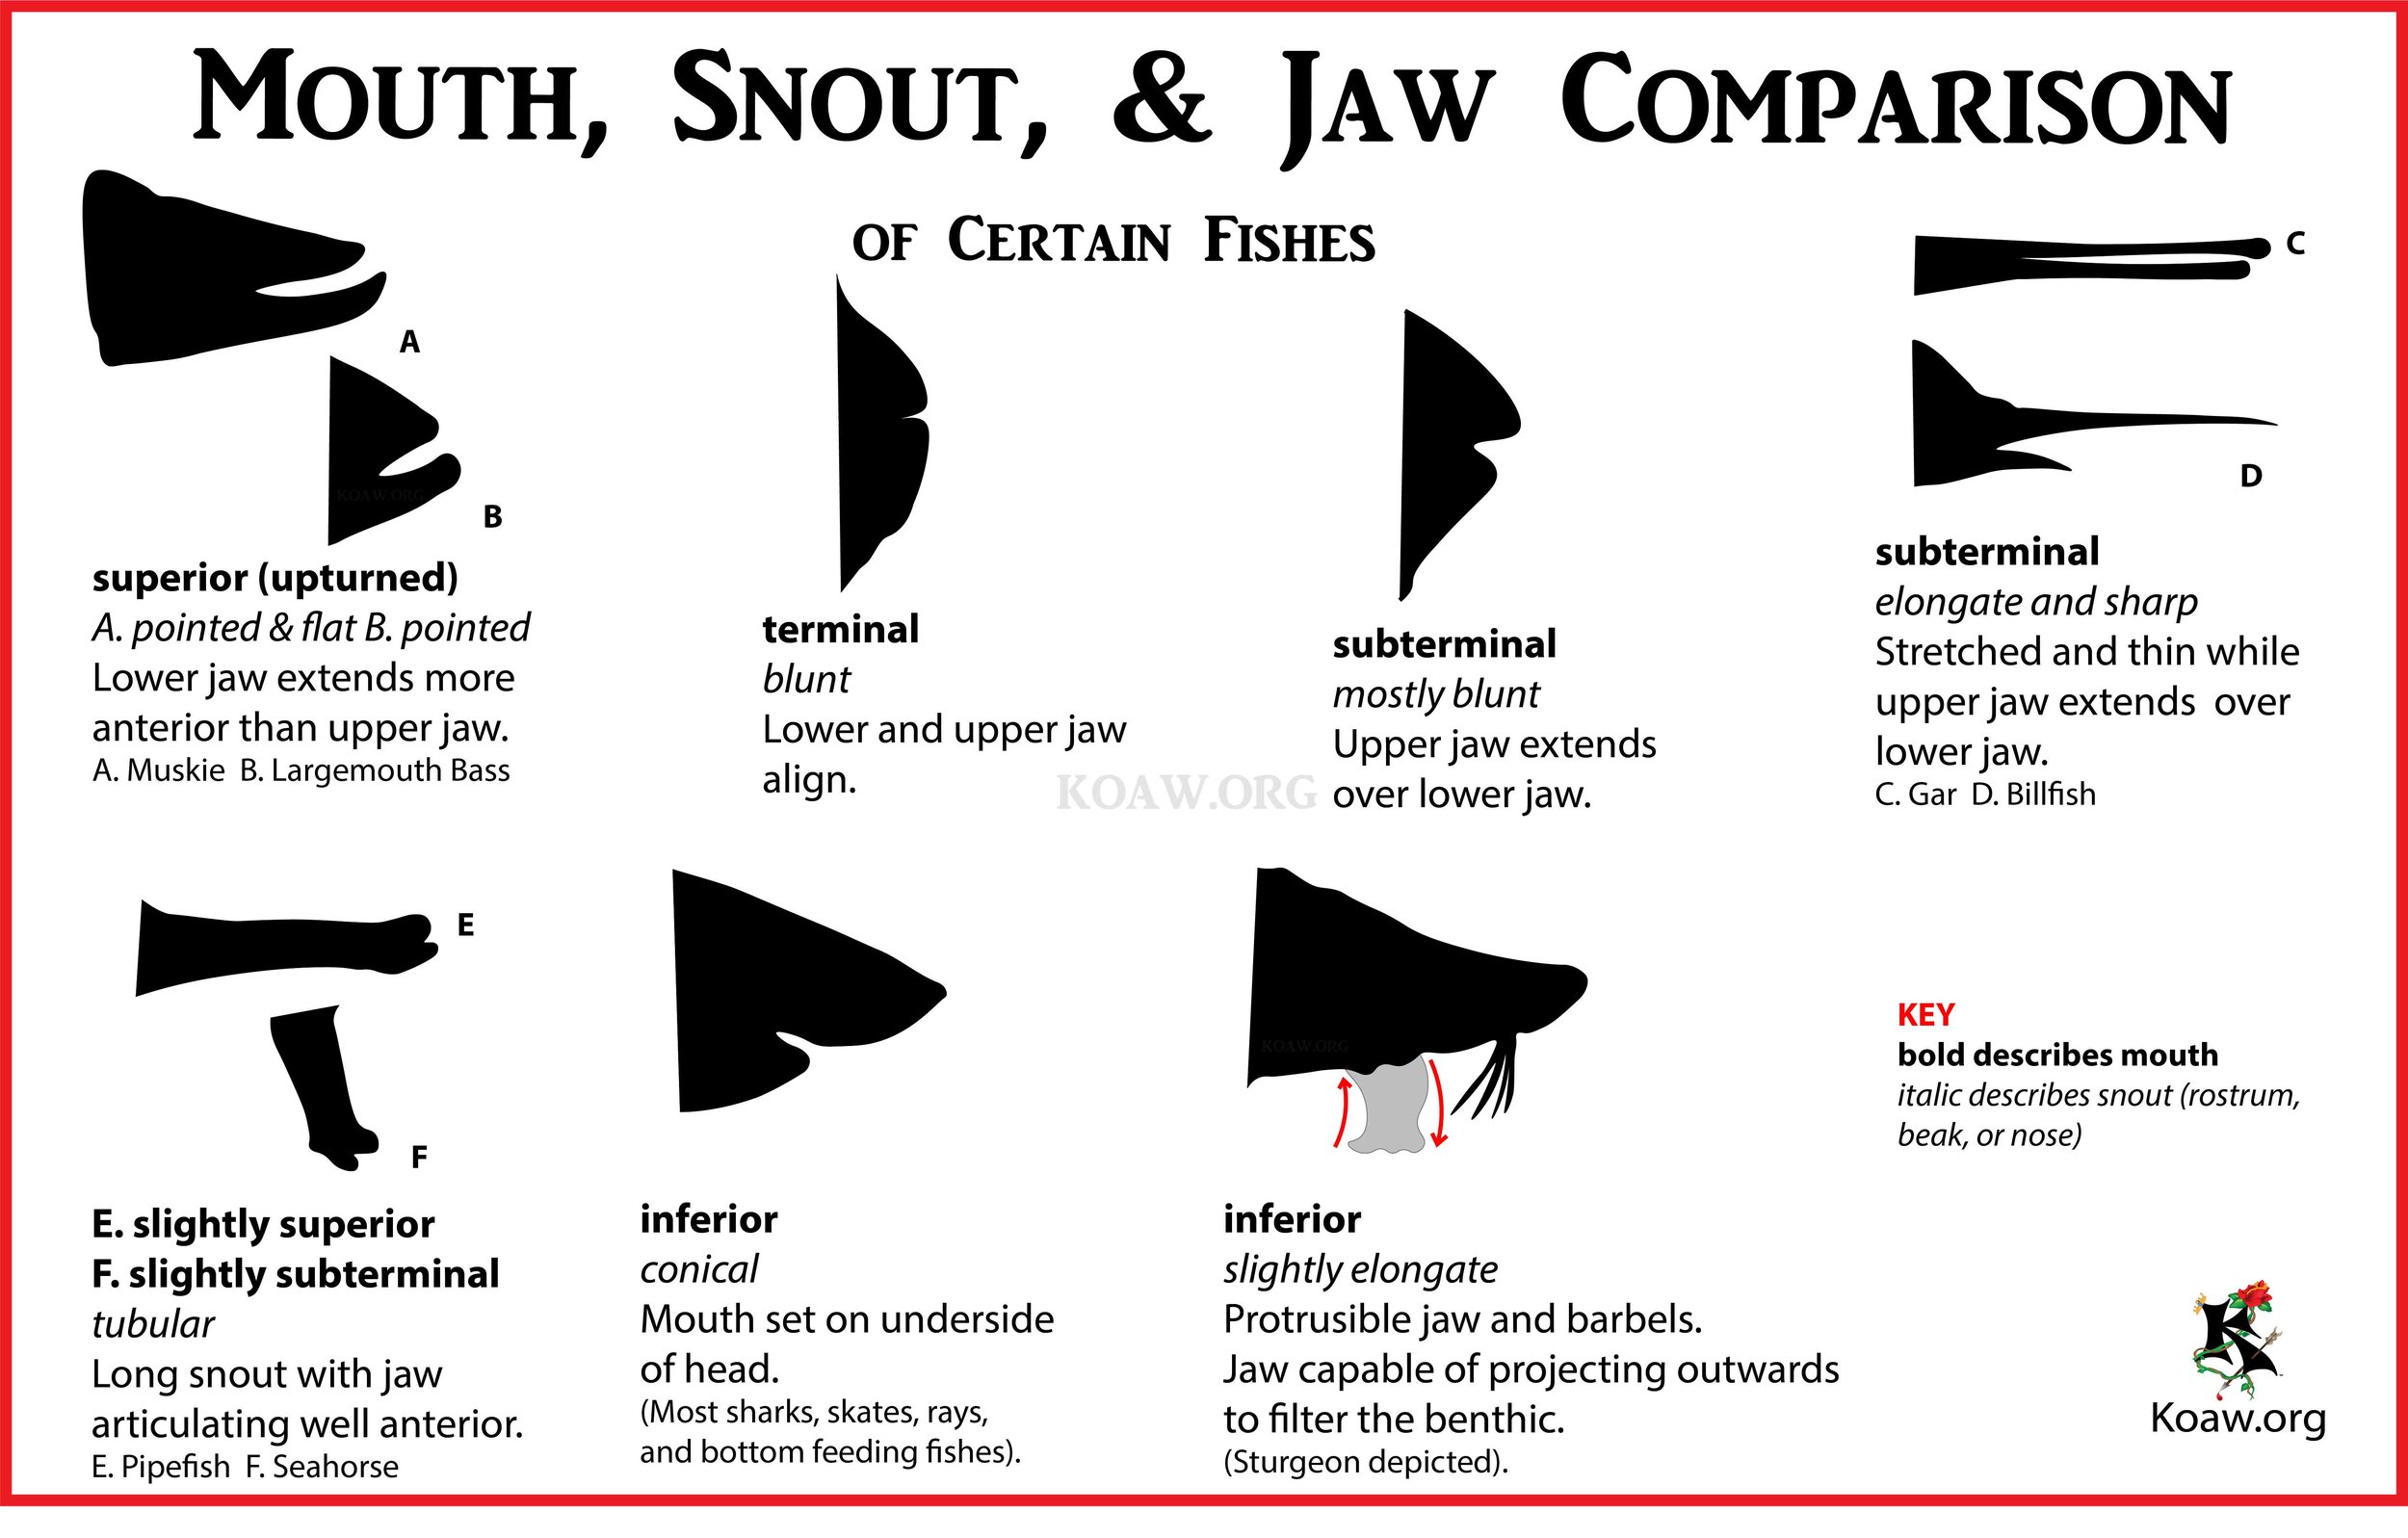 Fish Mouth, Snout, & Jaw Comparison - Image by Koaw